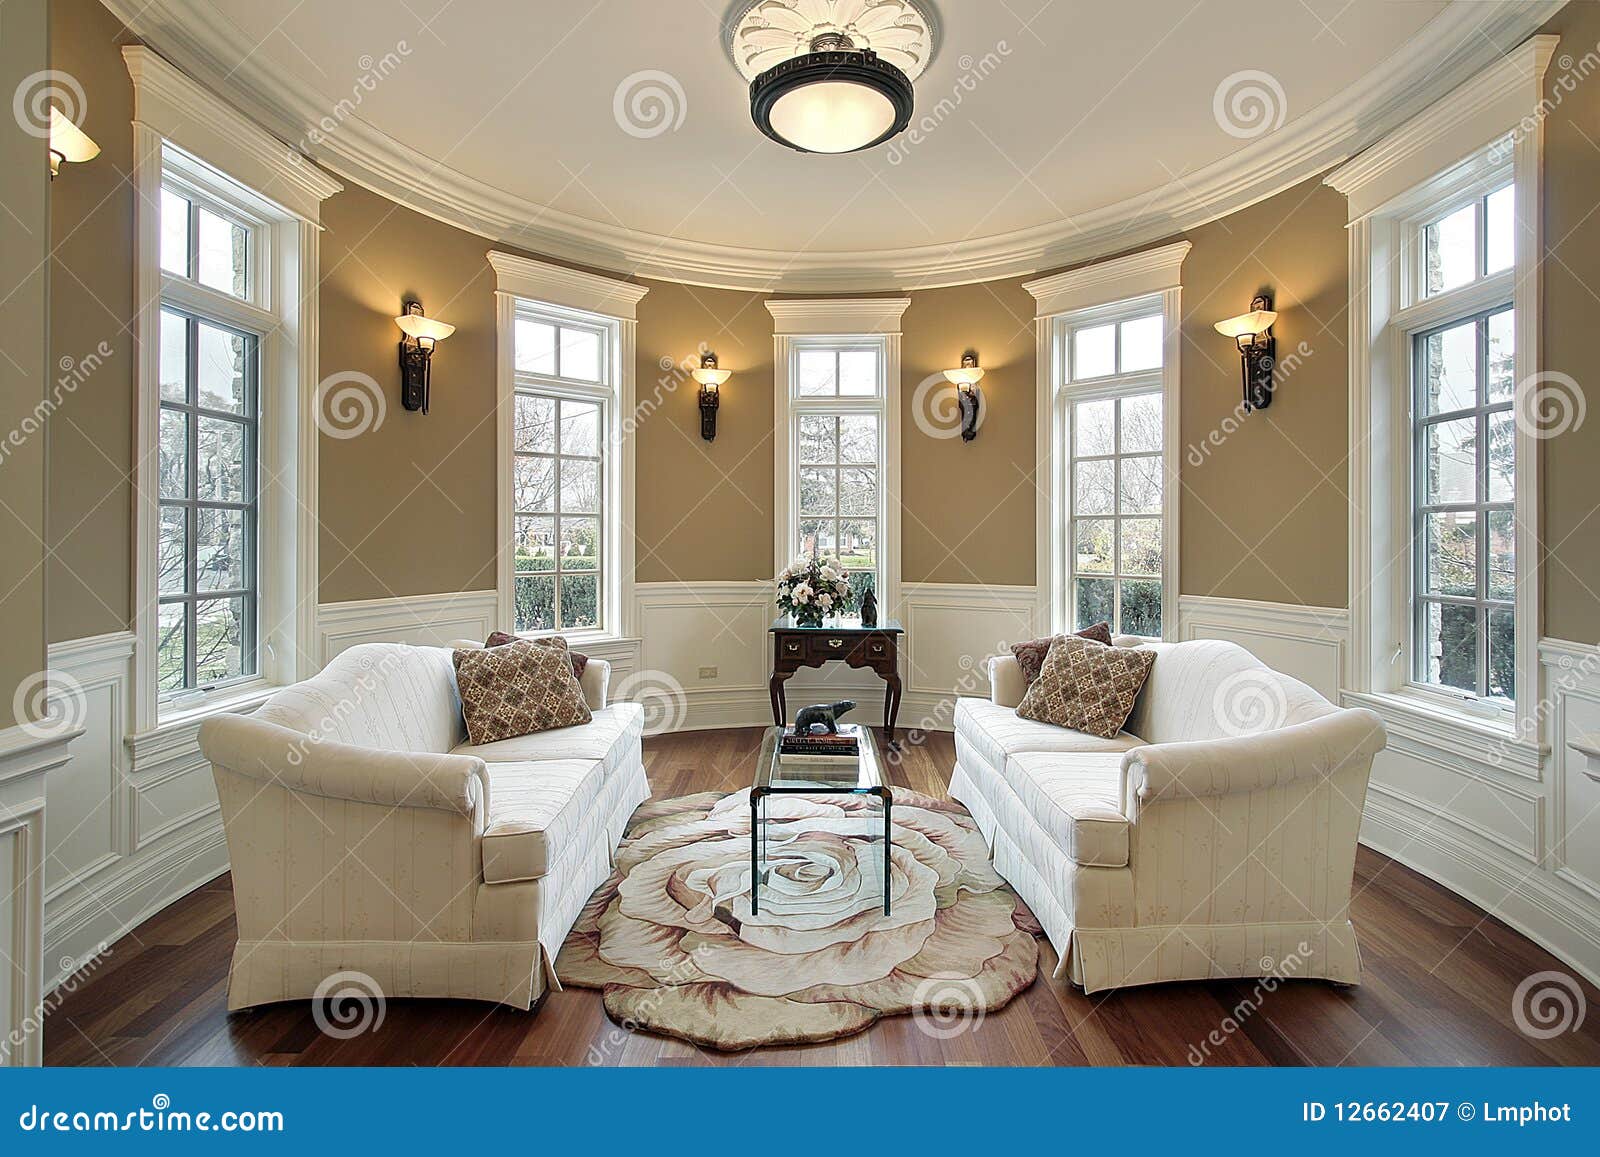 Living Room With Lighting Scones Royalty Free Stock Photography ...